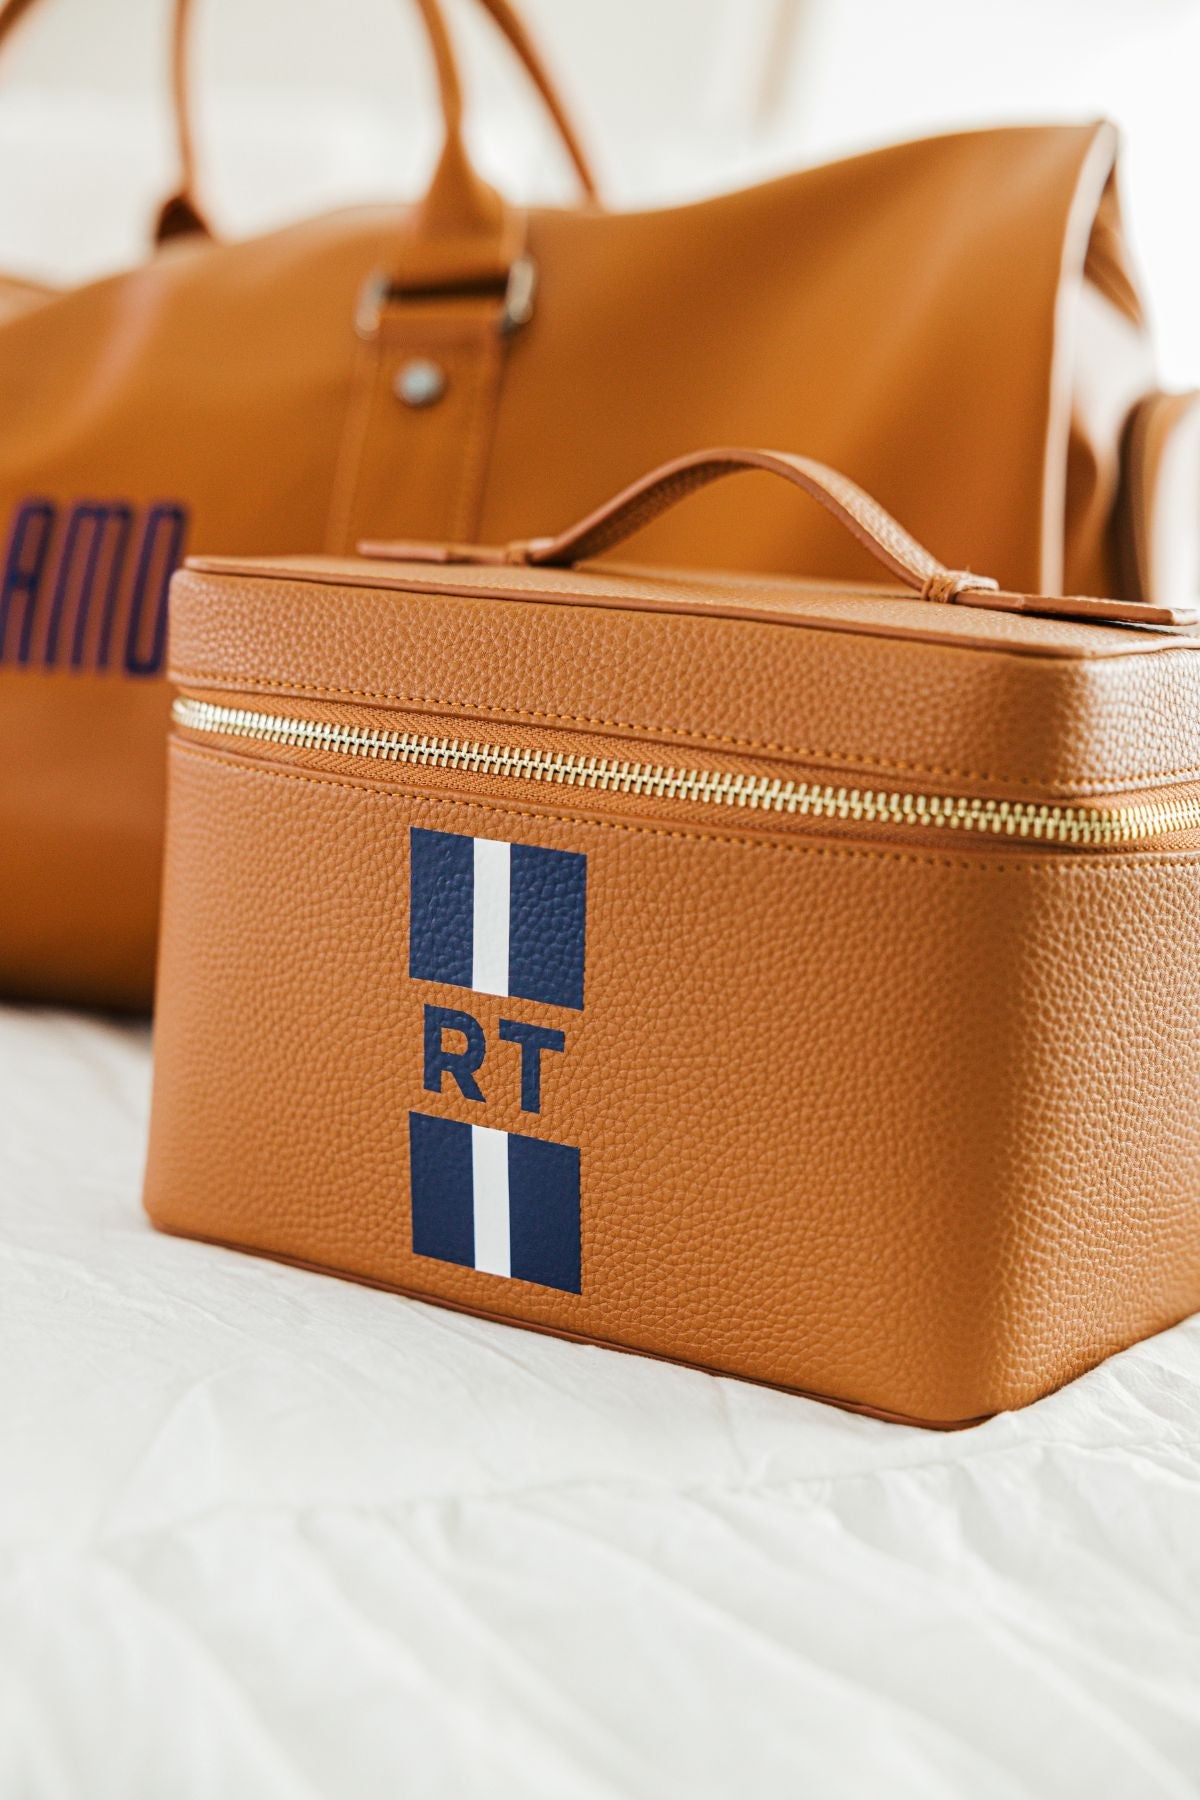 A group of white, tan, and black train cases are personalized with colorful stripe monograms.